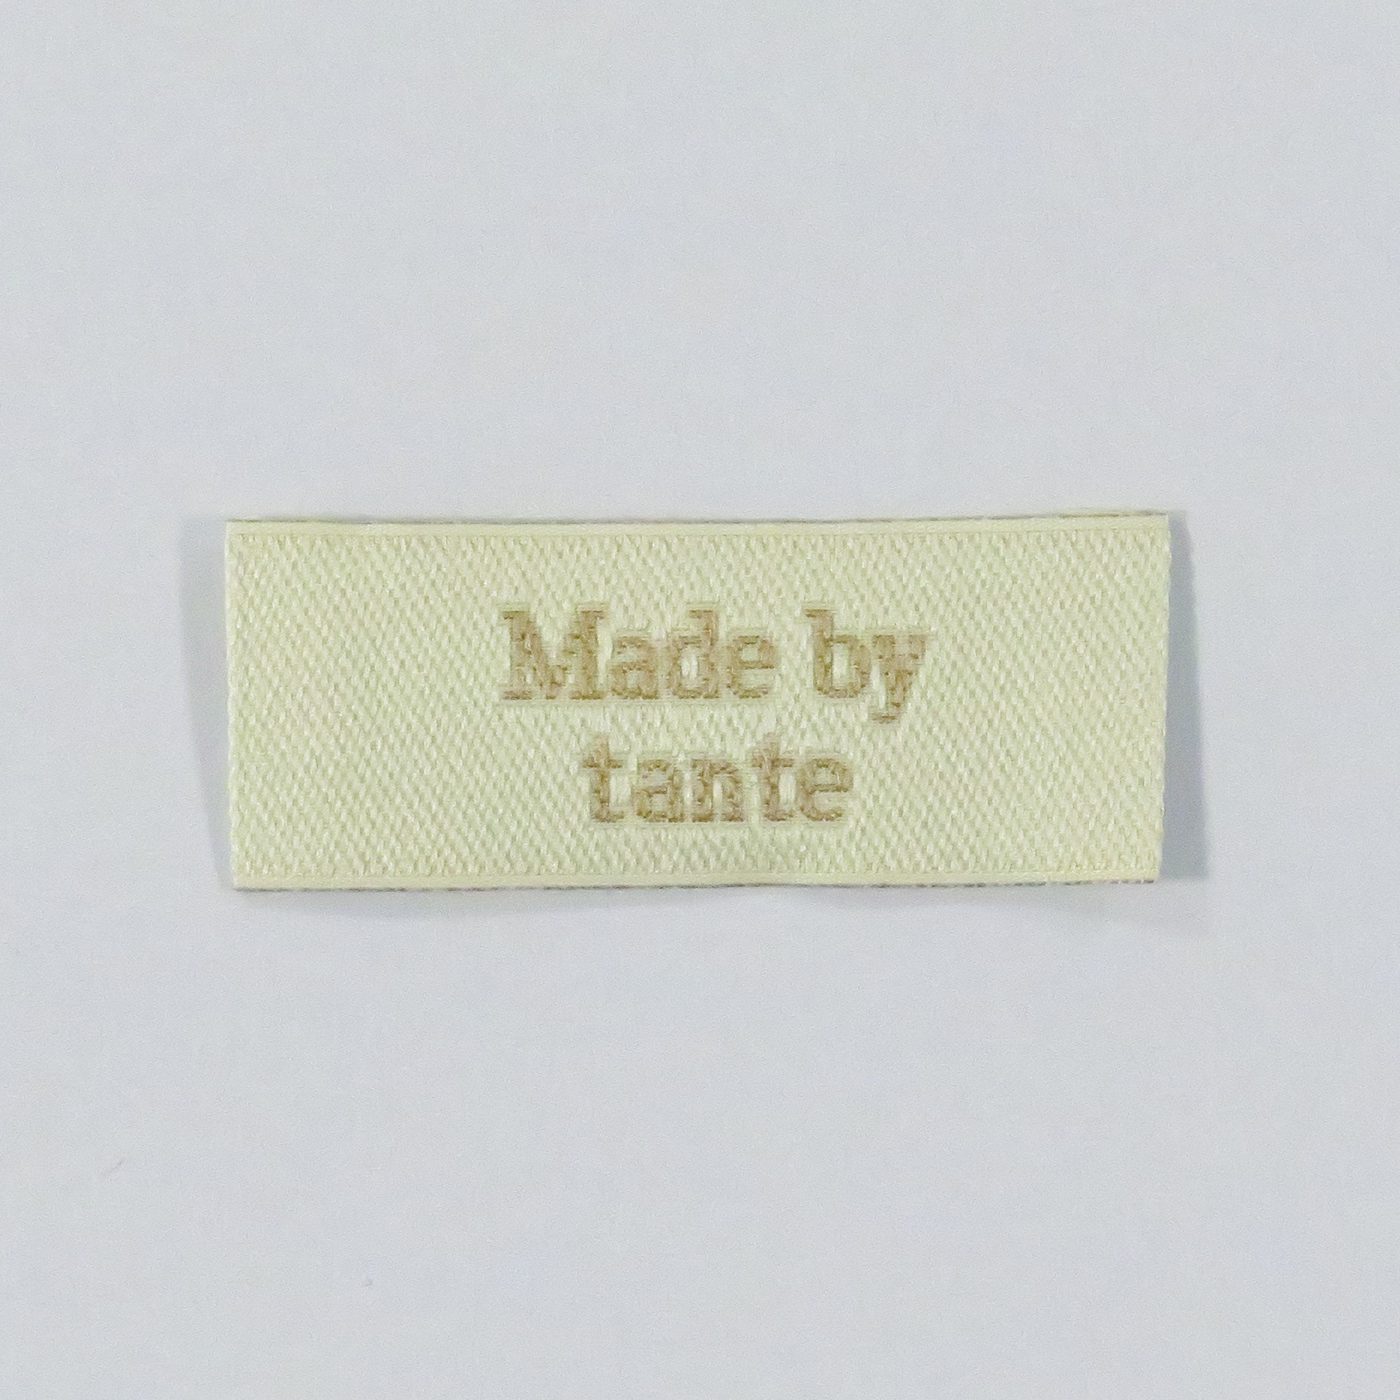 "Made by Tante"